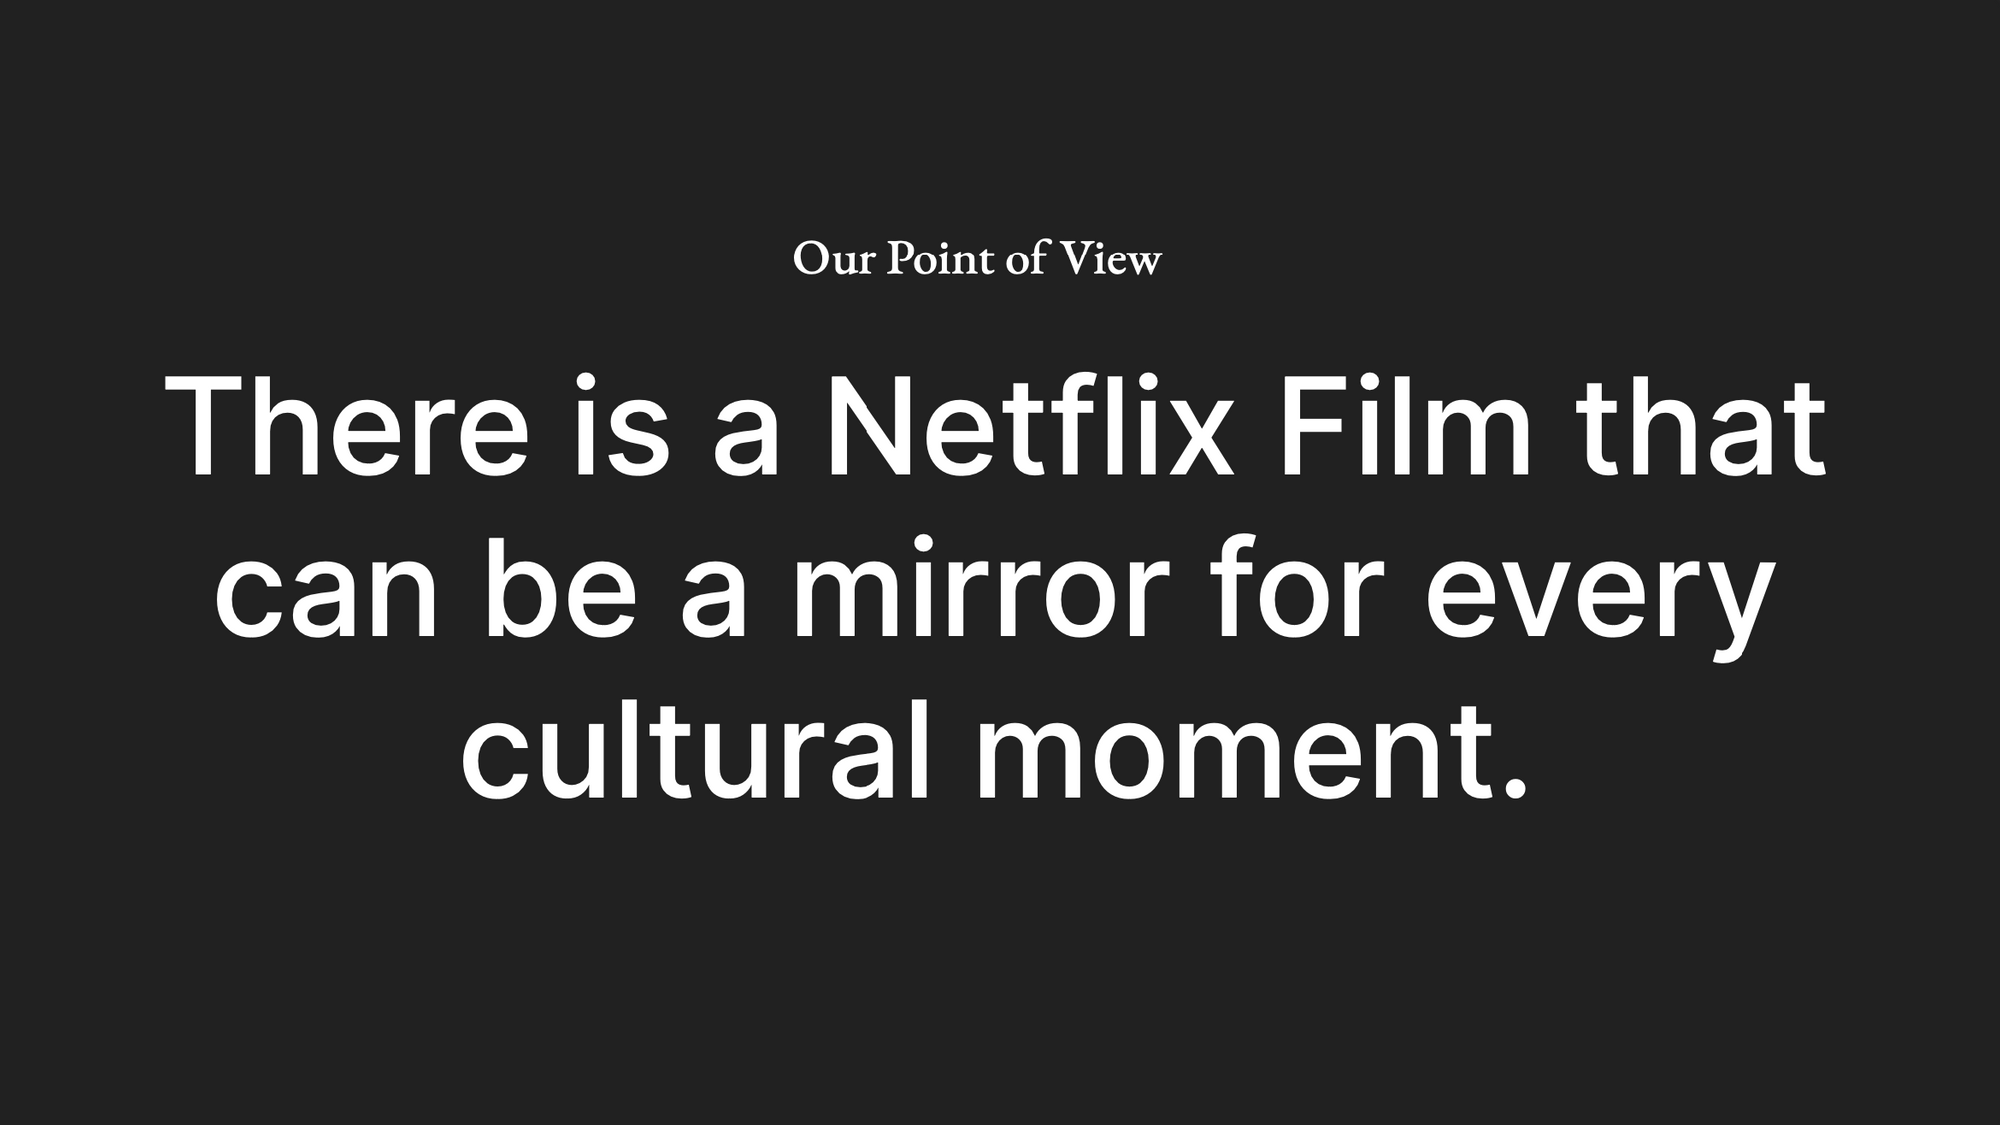 Netflix Film: Editorial Point of View